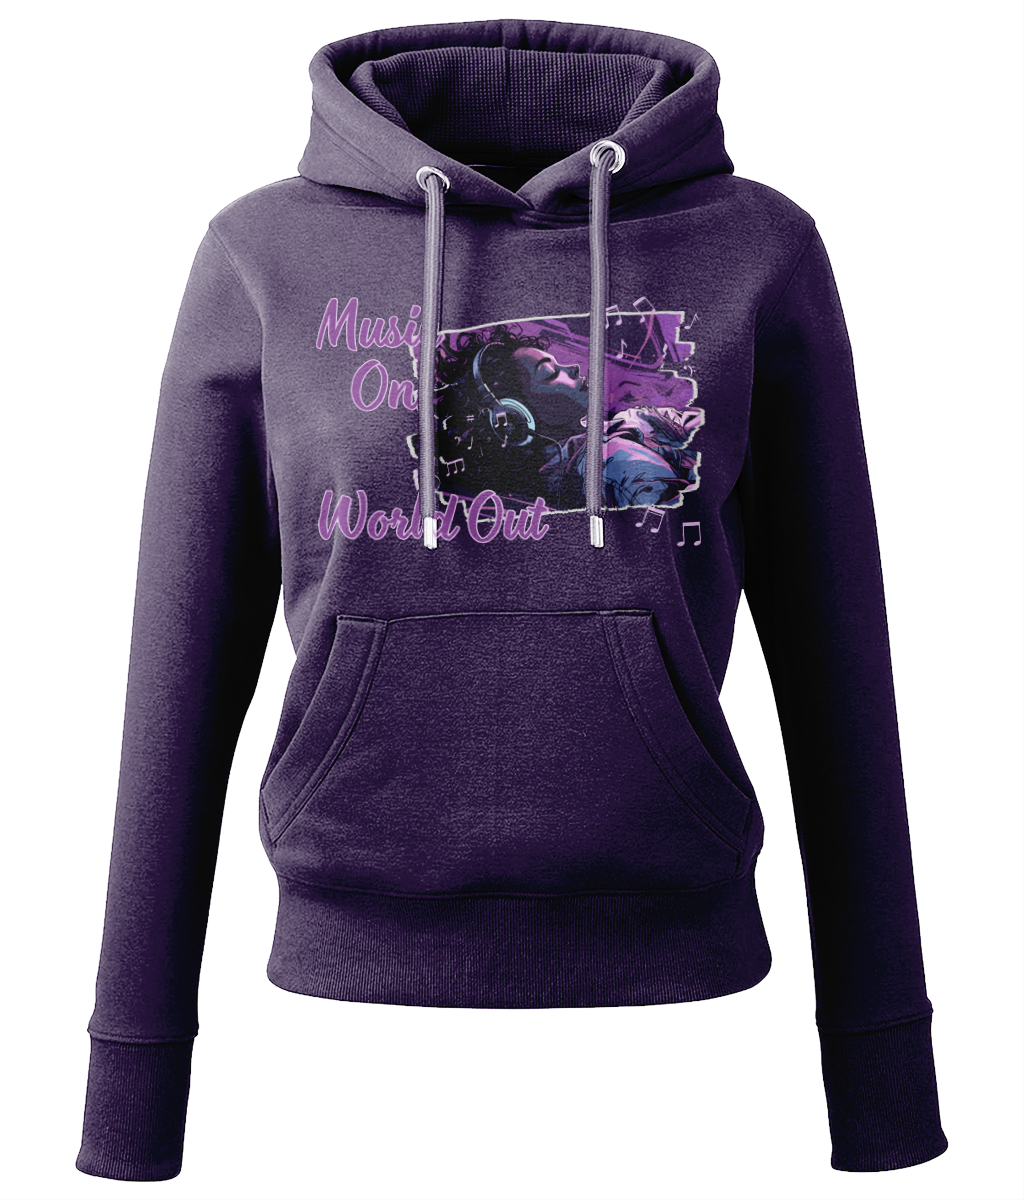 Eco-Friendly Women's Hoodie - Music On, World Out (Purple)